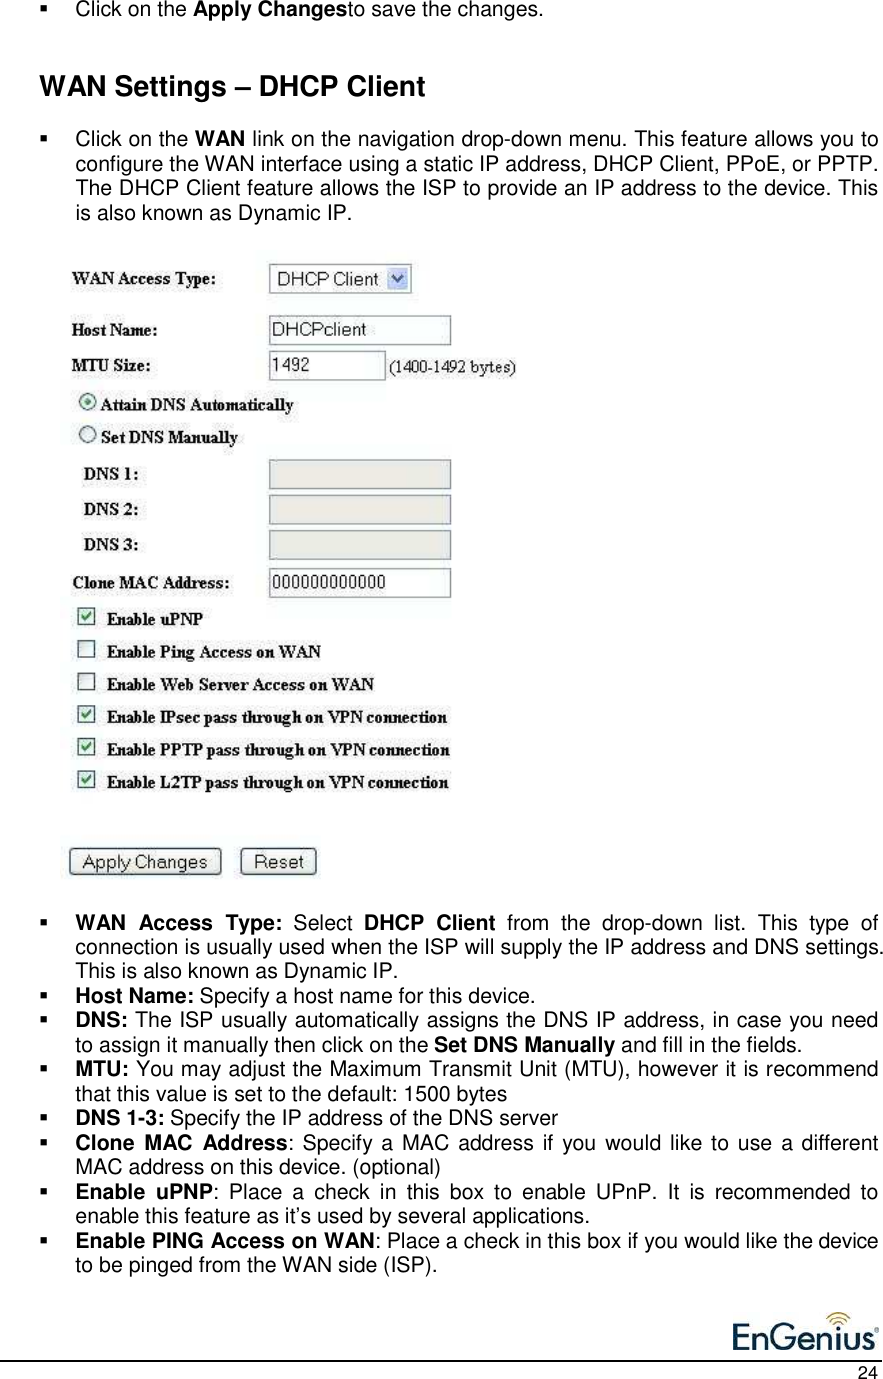    24   Click on the Apply Changesto save the changes.      WAN Settings – DHCP Client    Click on the WAN link on the navigation drop-down menu. This feature allows you to configure the WAN interface using a static IP address, DHCP Client, PPoE, or PPTP.  The DHCP Client feature allows the ISP to provide an IP address to the device. This is also known as Dynamic IP.                                WAN  Access  Type:  Select  DHCP  Client  from  the  drop-down  list.  This  type  of connection is usually used when the ISP will supply the IP address and DNS settings. This is also known as Dynamic IP.  Host Name: Specify a host name for this device.  DNS: The ISP usually automatically assigns the DNS IP address, in case you need to assign it manually then click on the Set DNS Manually and fill in the fields.   MTU: You may adjust the Maximum Transmit Unit (MTU), however it is recommend that this value is set to the default: 1500 bytes  DNS 1-3: Specify the IP address of the DNS server  Clone  MAC  Address: Specify a MAC address if you would like to use a different MAC address on this device. (optional)  Enable  uPNP:  Place  a  check  in  this  box  to  enable  UPnP.  It  is  recommended  to enable this feature as it’s used by several applications.   Enable PING Access on WAN: Place a check in this box if you would like the device to be pinged from the WAN side (ISP).  